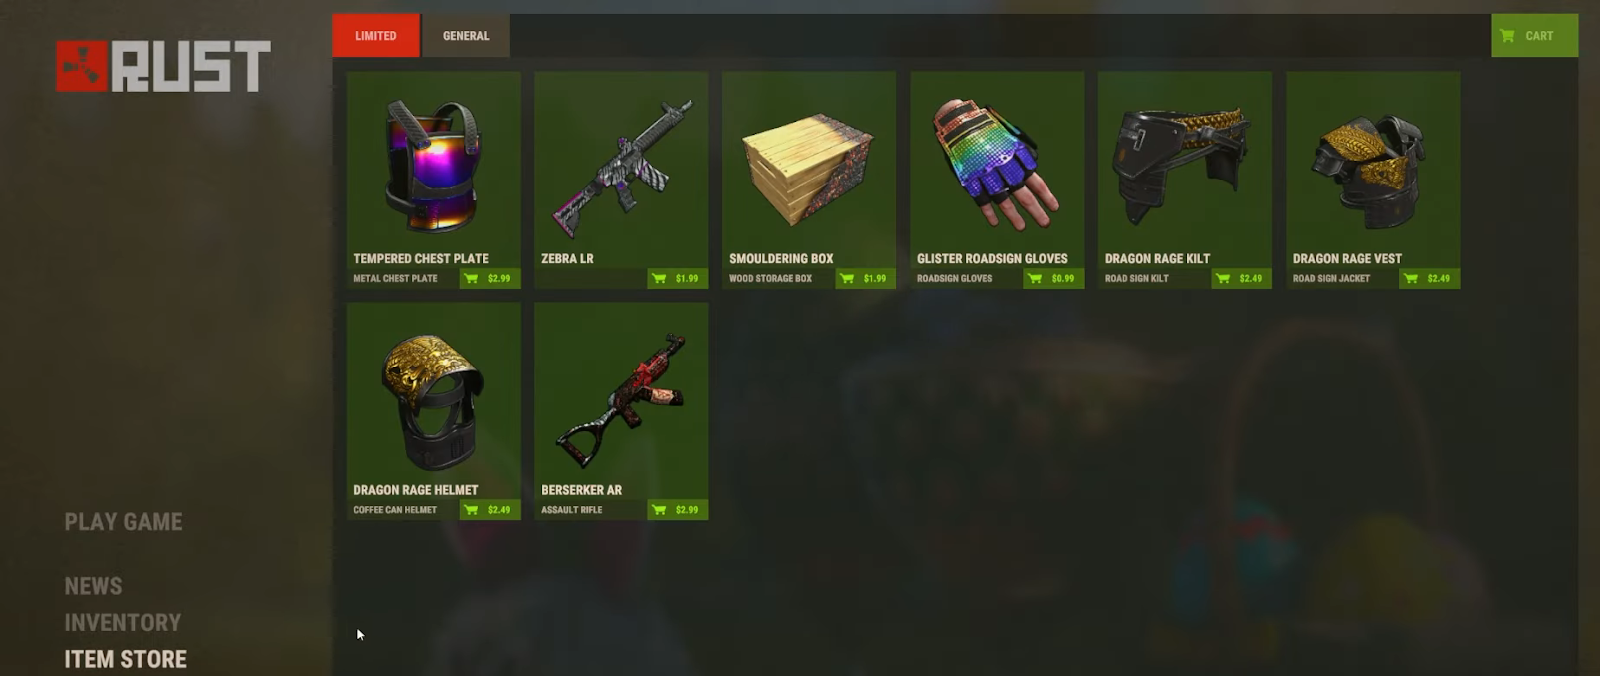 It's preferable to purchase Rust skins on Steam Marketplace instead of in the game.